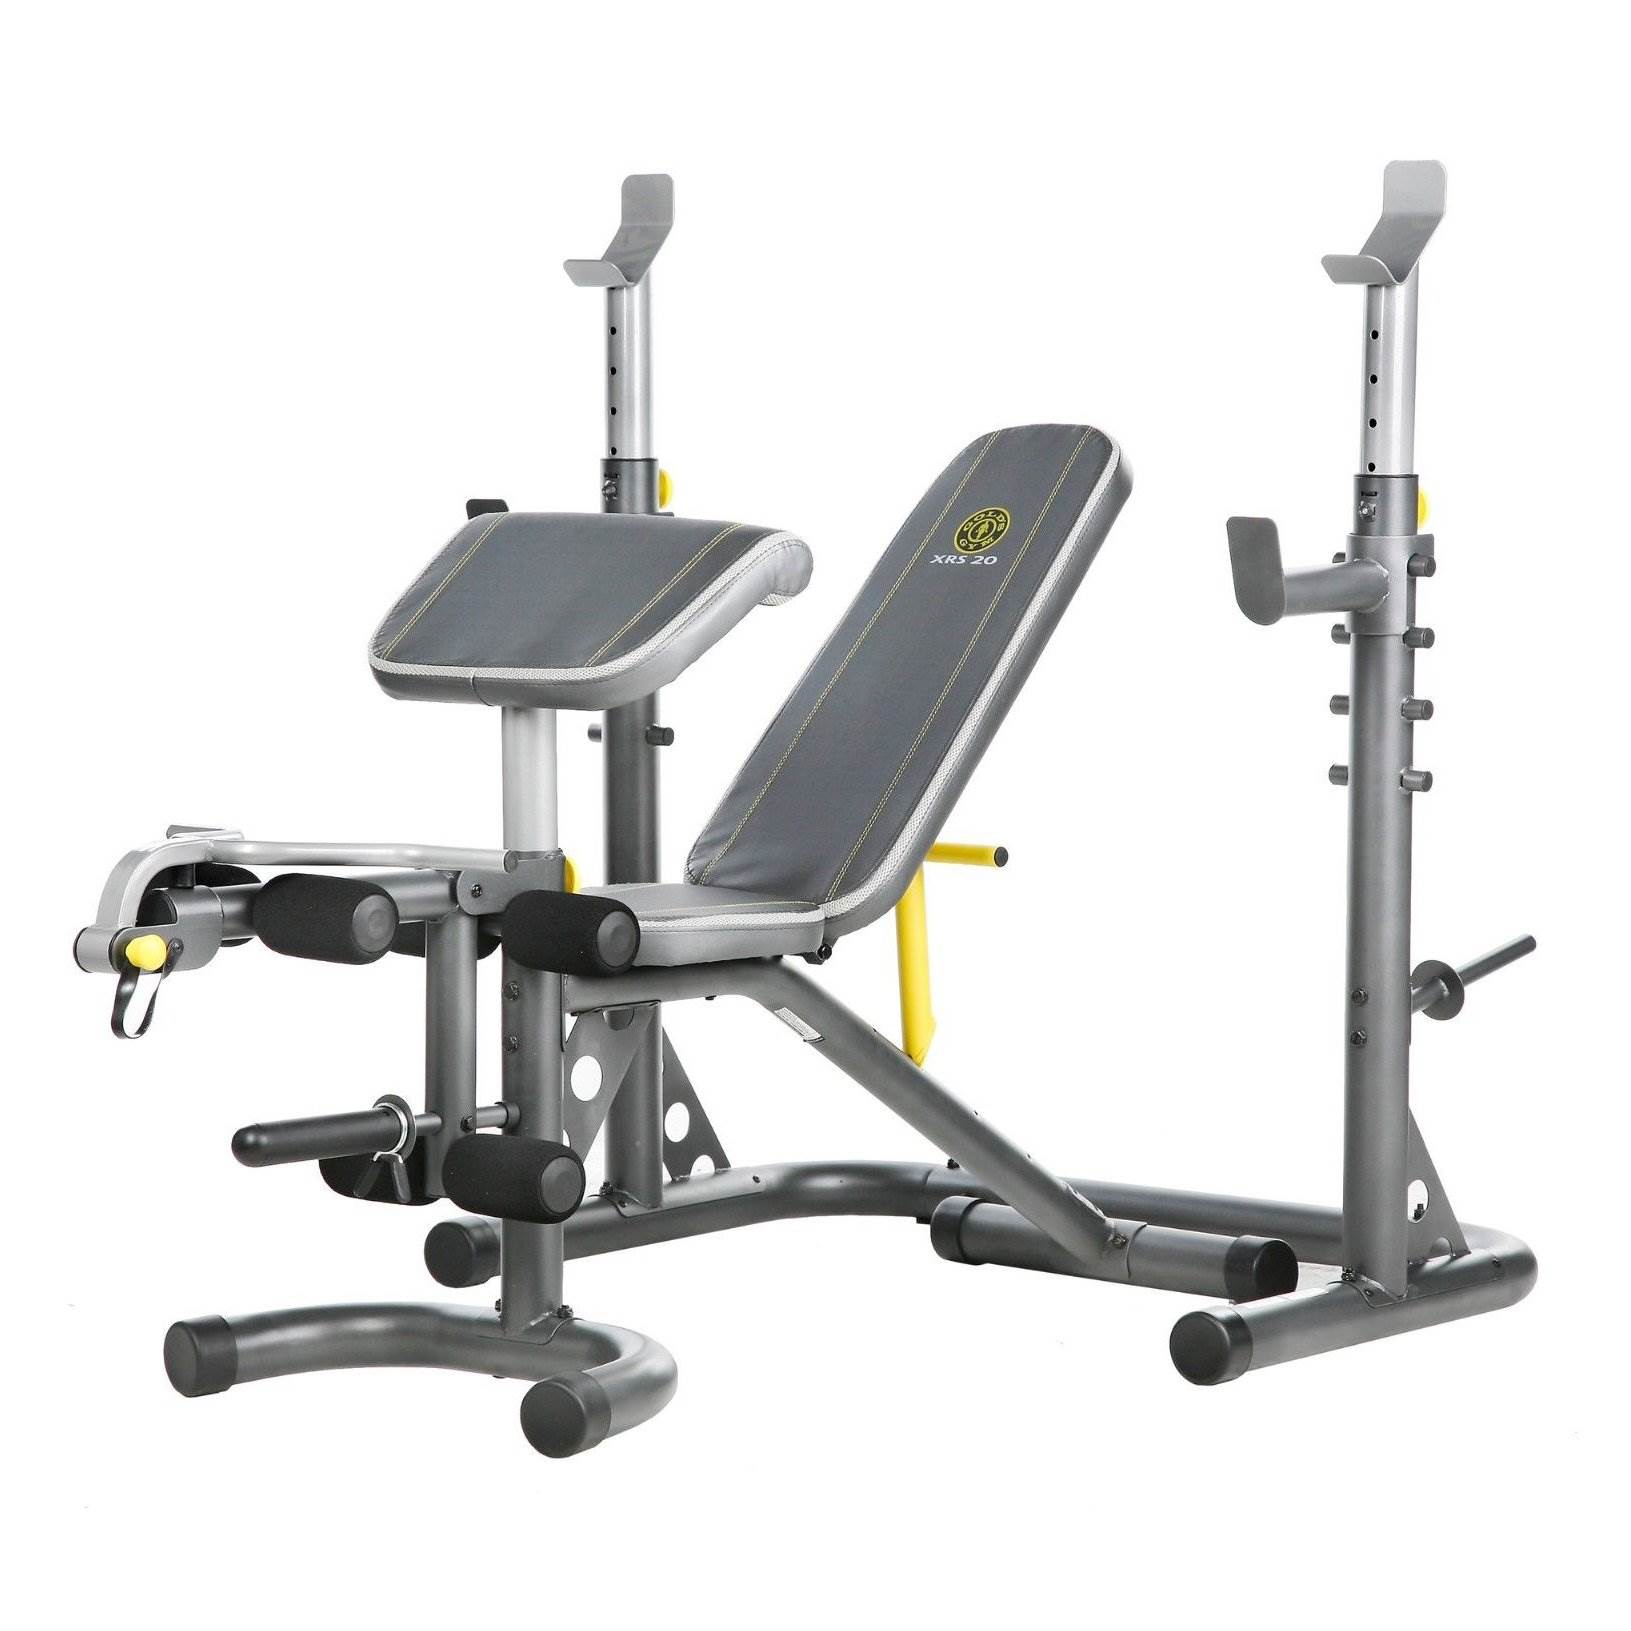 Gold's Gym XRS 20 Adjustable Olympic Workout Bench with Squat Rack, Leg Extension, Preacher Curl, and Weight Storage - image 1 of 15